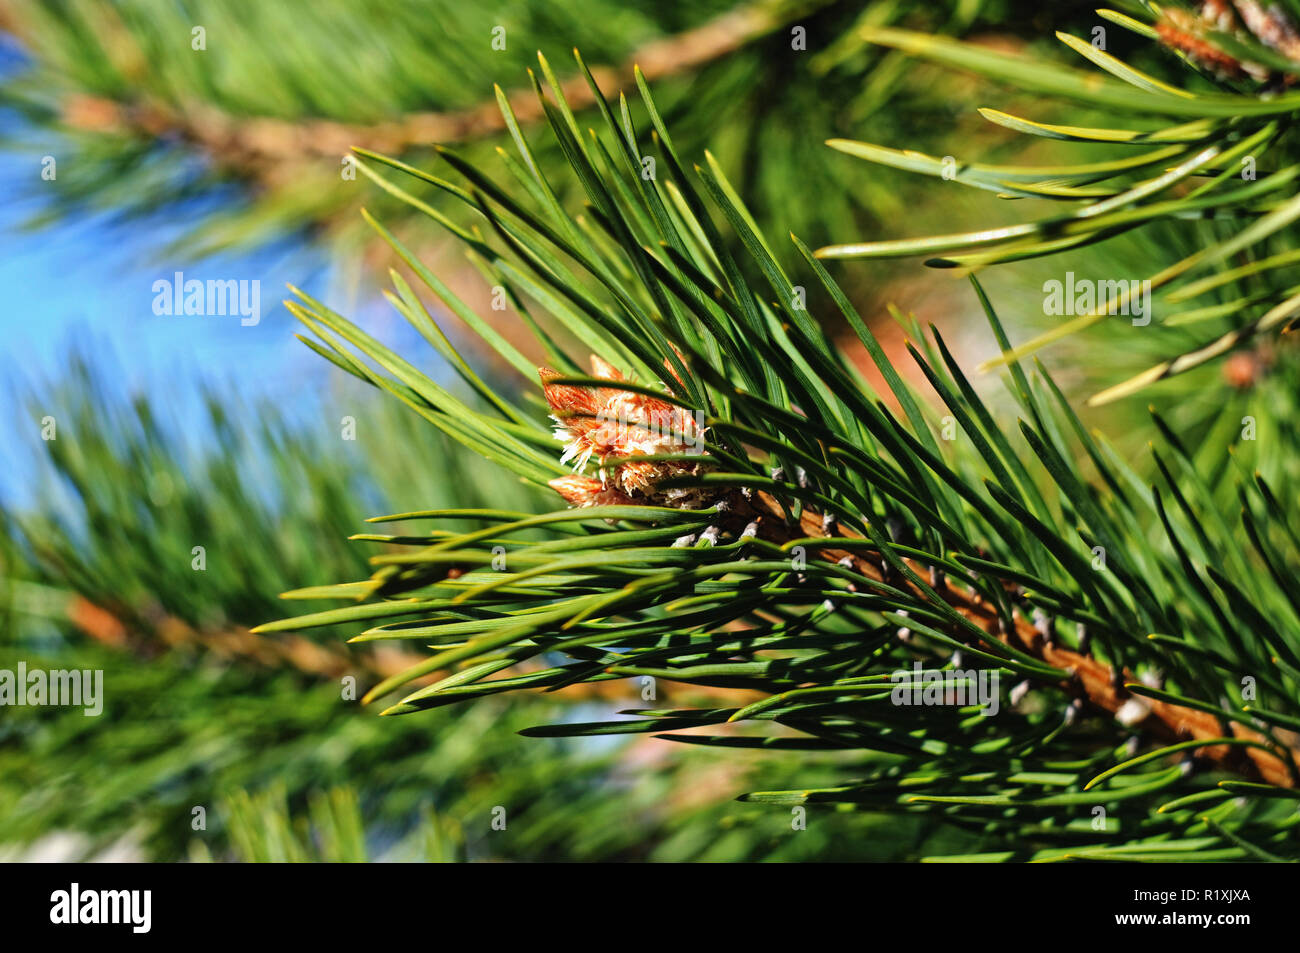 Colorful fresh green young pine branch with a young bud close-up. Stock Photo